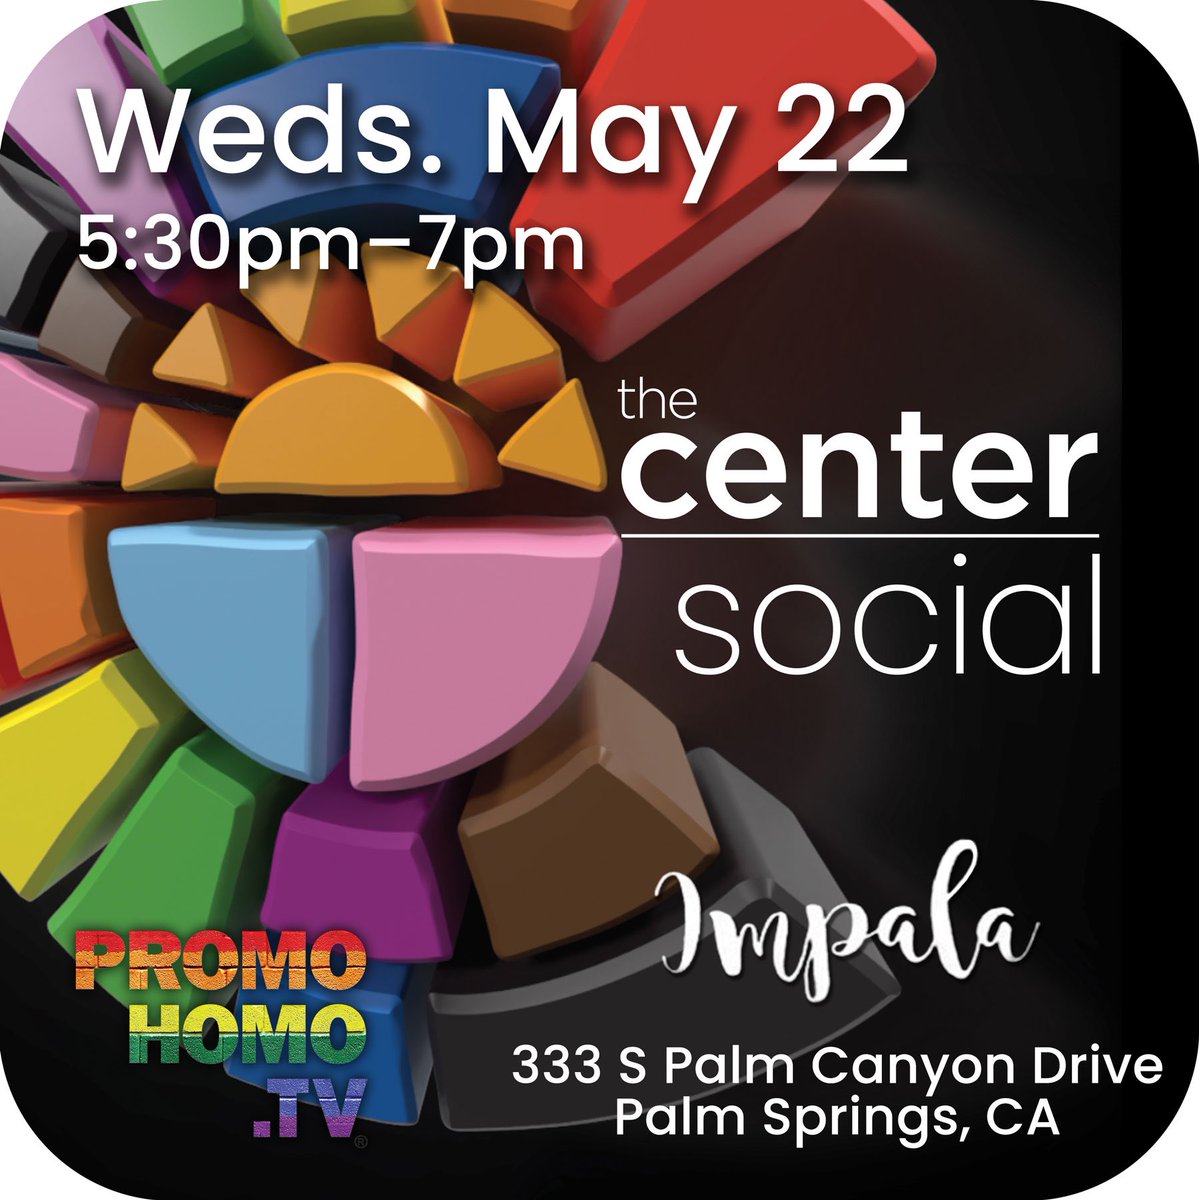 COME GET YOUR FREE PROMOHOMO.TV® STICKER at The Center Social, FREE, Wed. May 22nd, 2024, 5:30 PM to 7:00 PM. at Impala, 333. South Palm Canyon Drive, Palm Springs, CA. #palmsprings #promohomotv #ilovegaypalmsprings @thecentercv